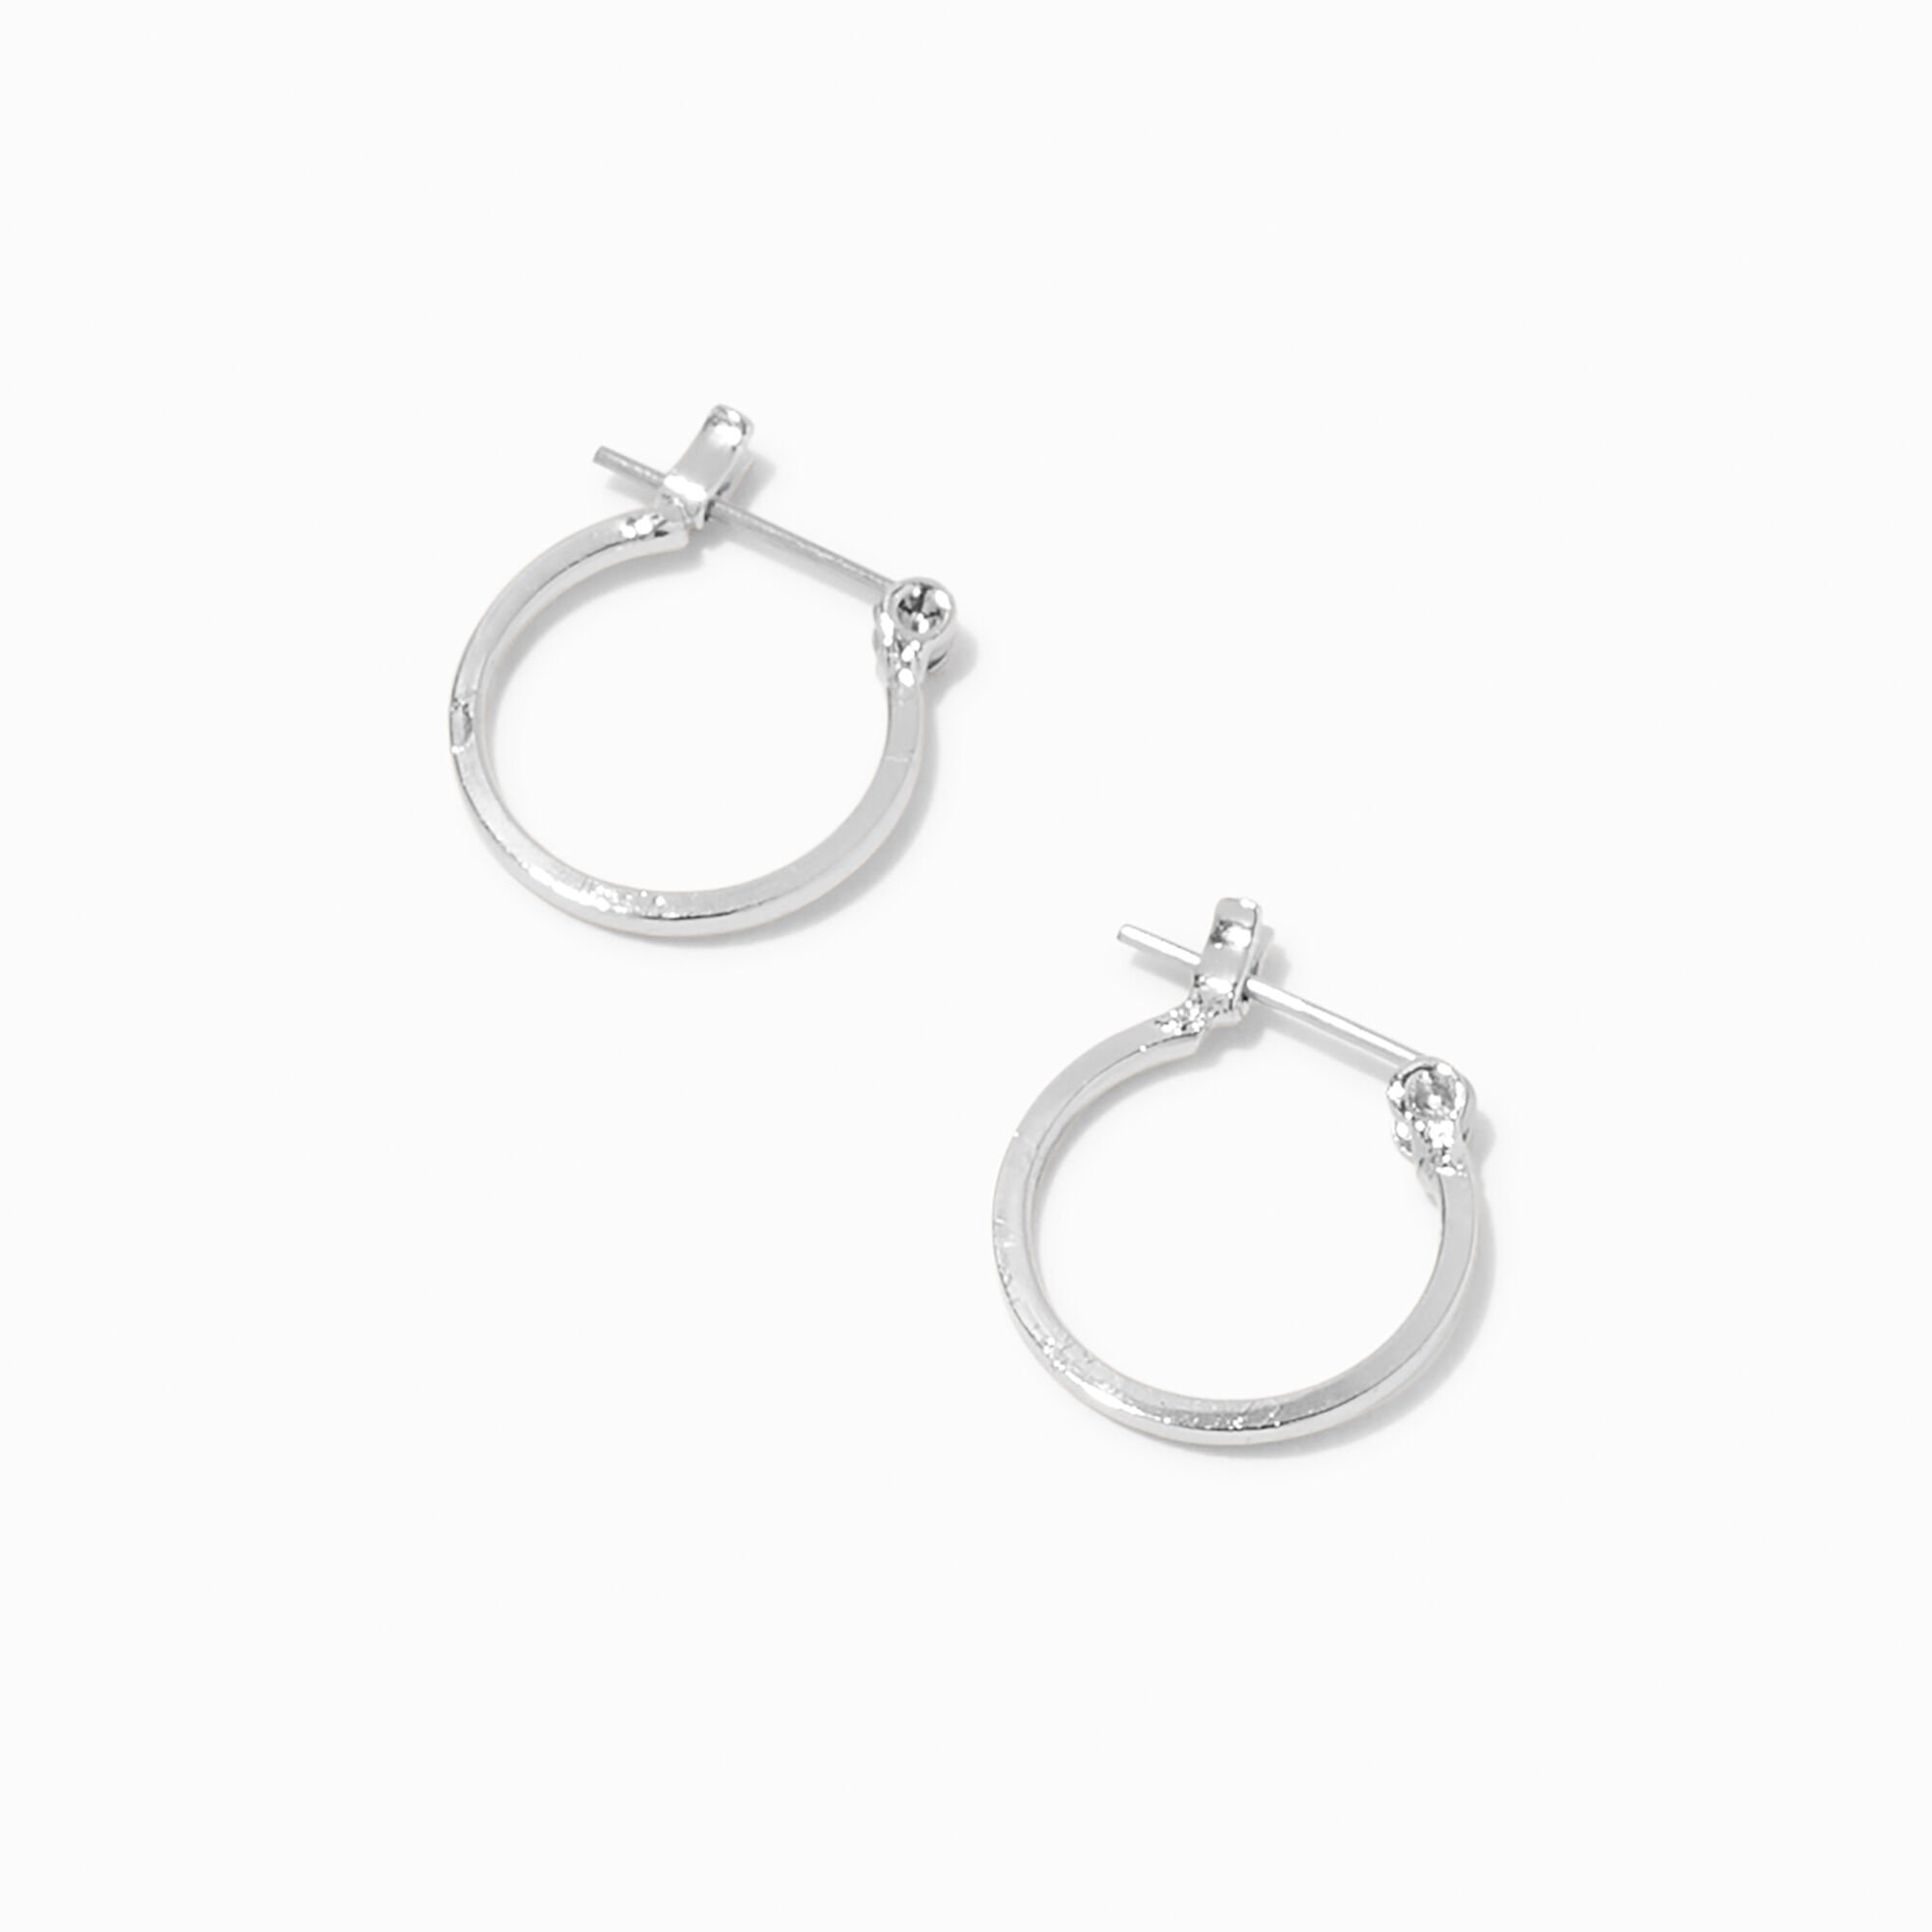 View Claires Tone 15MM Hoop Earrings Silver information